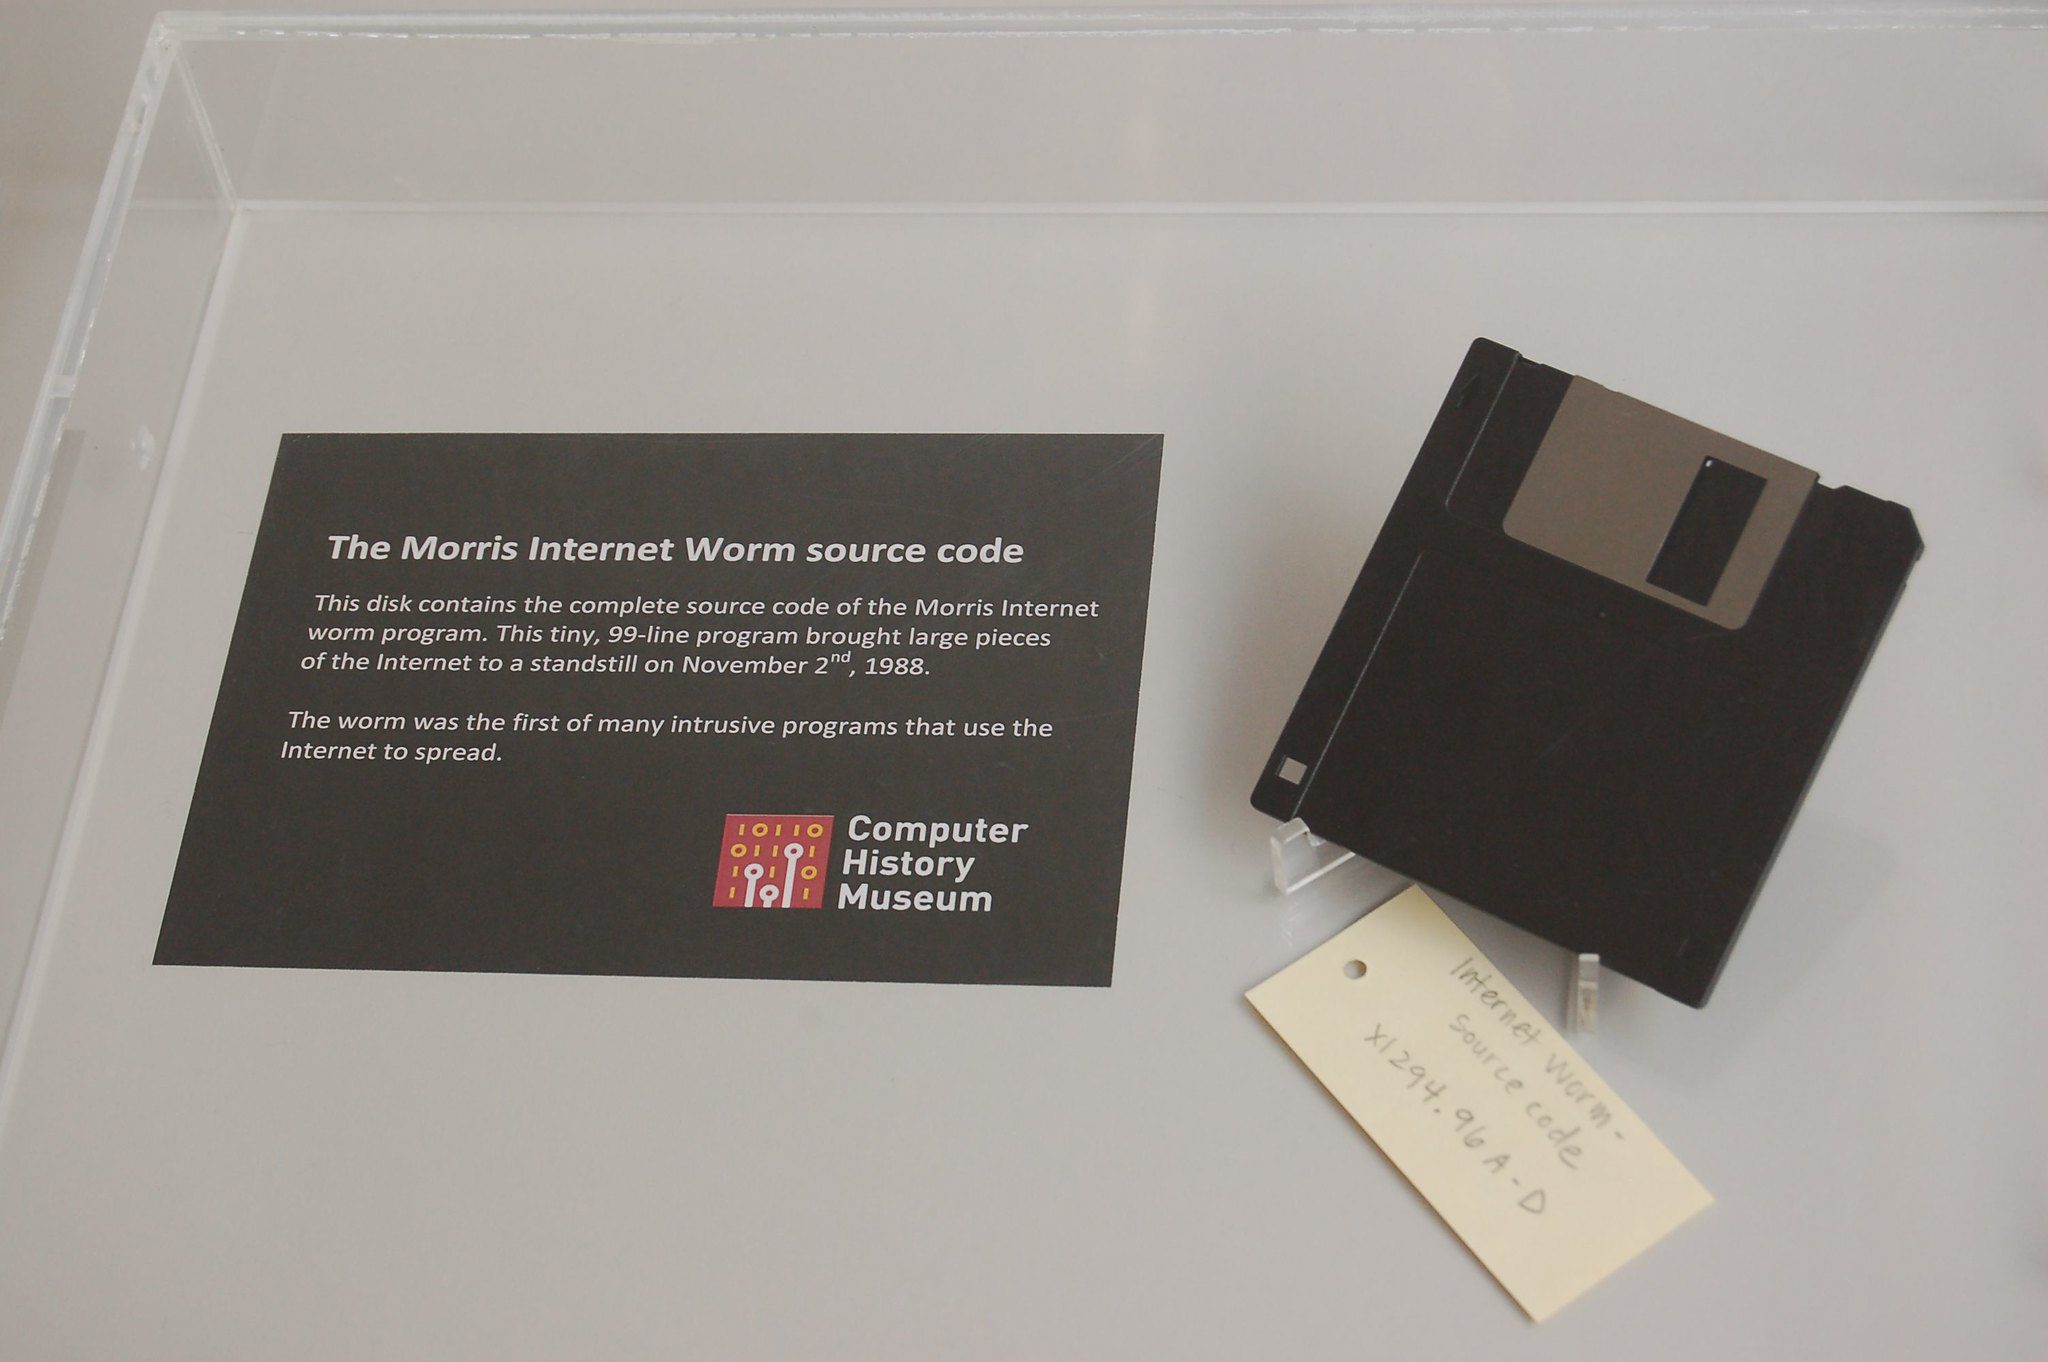 A floppy disk containing the Morris Worm soruce code on display at the Computer History Museum